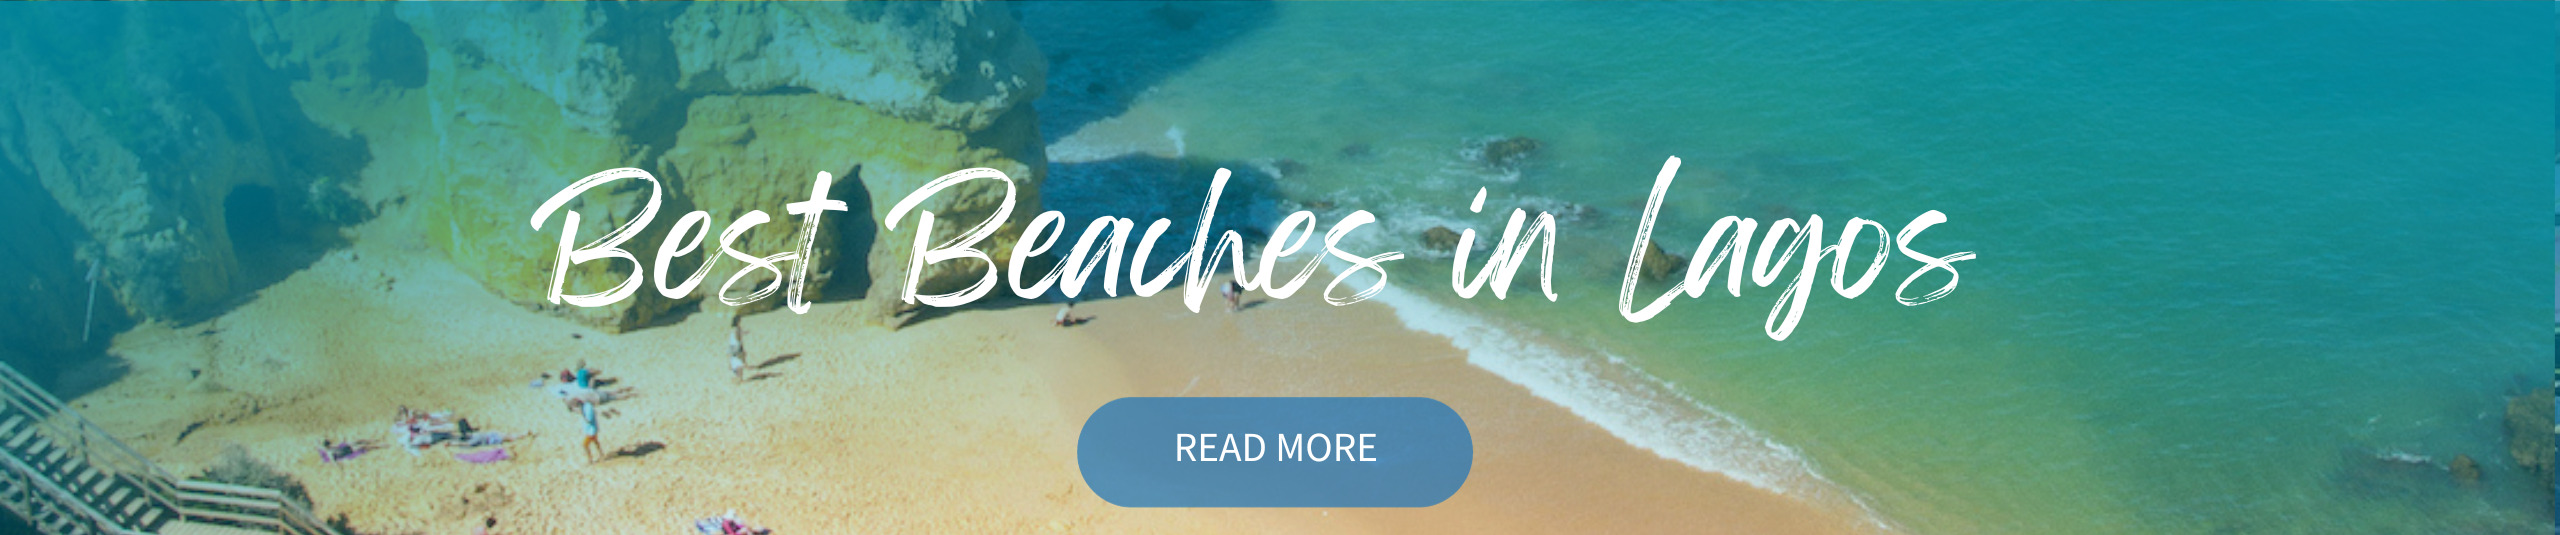 Best Beaches in Lagos Portugal CTA Web Banner The Villa Agency